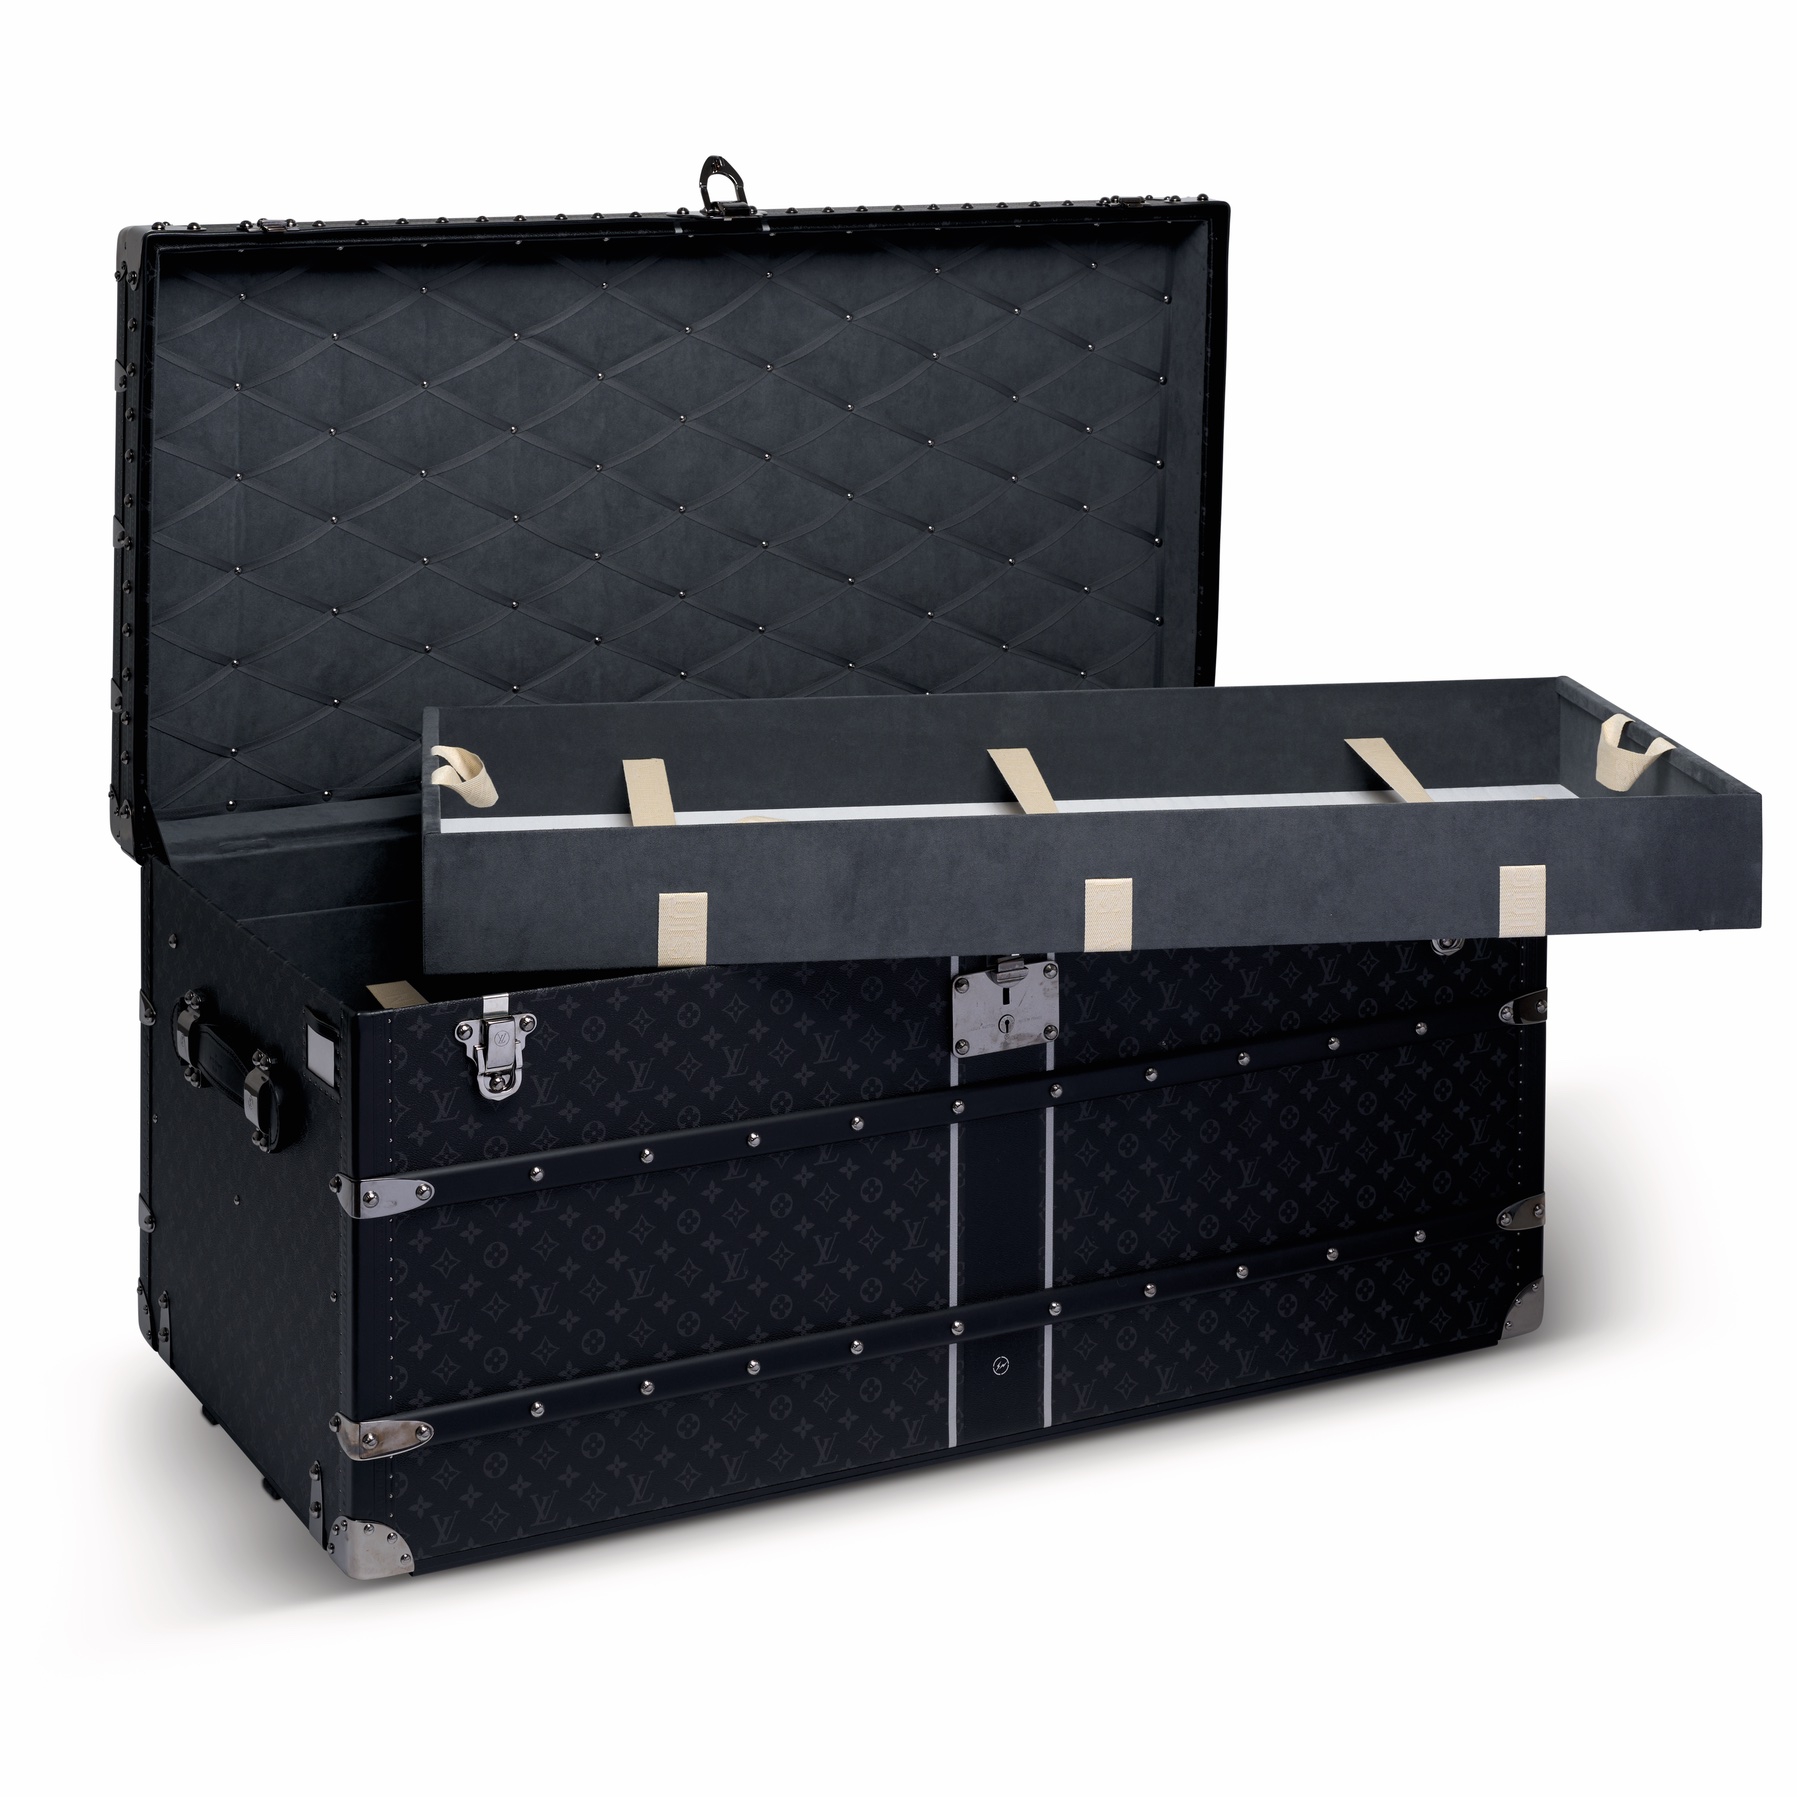 Louis Vuitton Limited Edition Eclipse Monogram Canvas Courrier Lozine Trunk 110 With Silver Hardware by Fragment Design (2017)